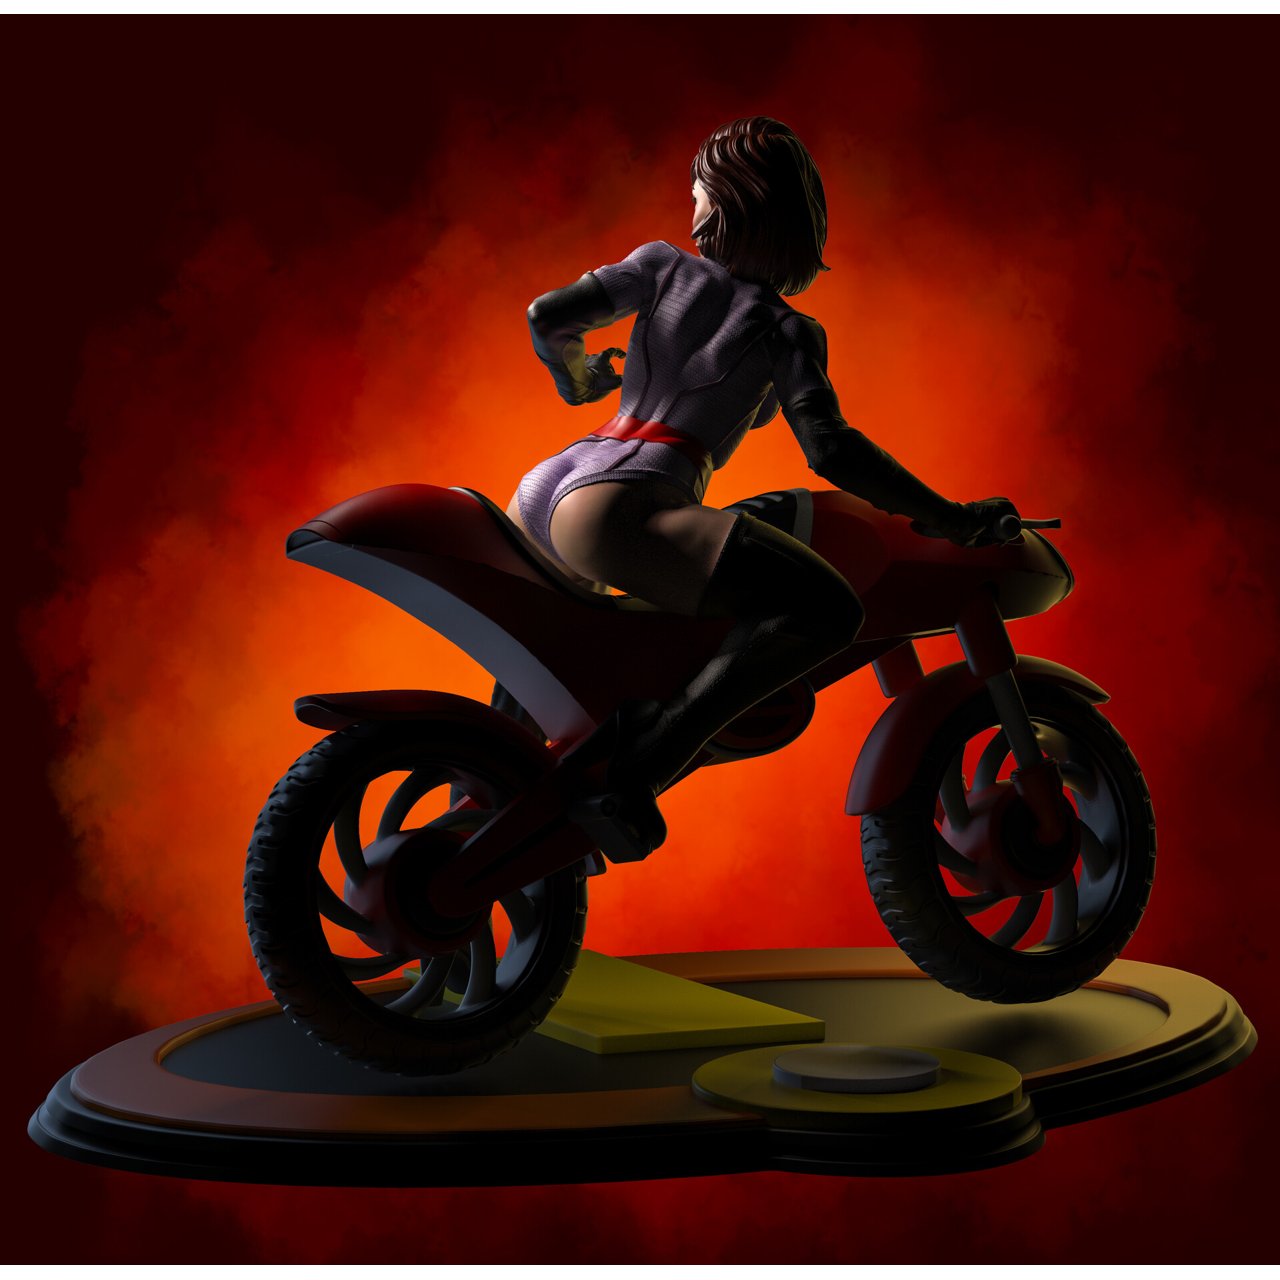 Fan Art Models Elastigirl and Elasticycle from The Incredibles  MINISTL 6